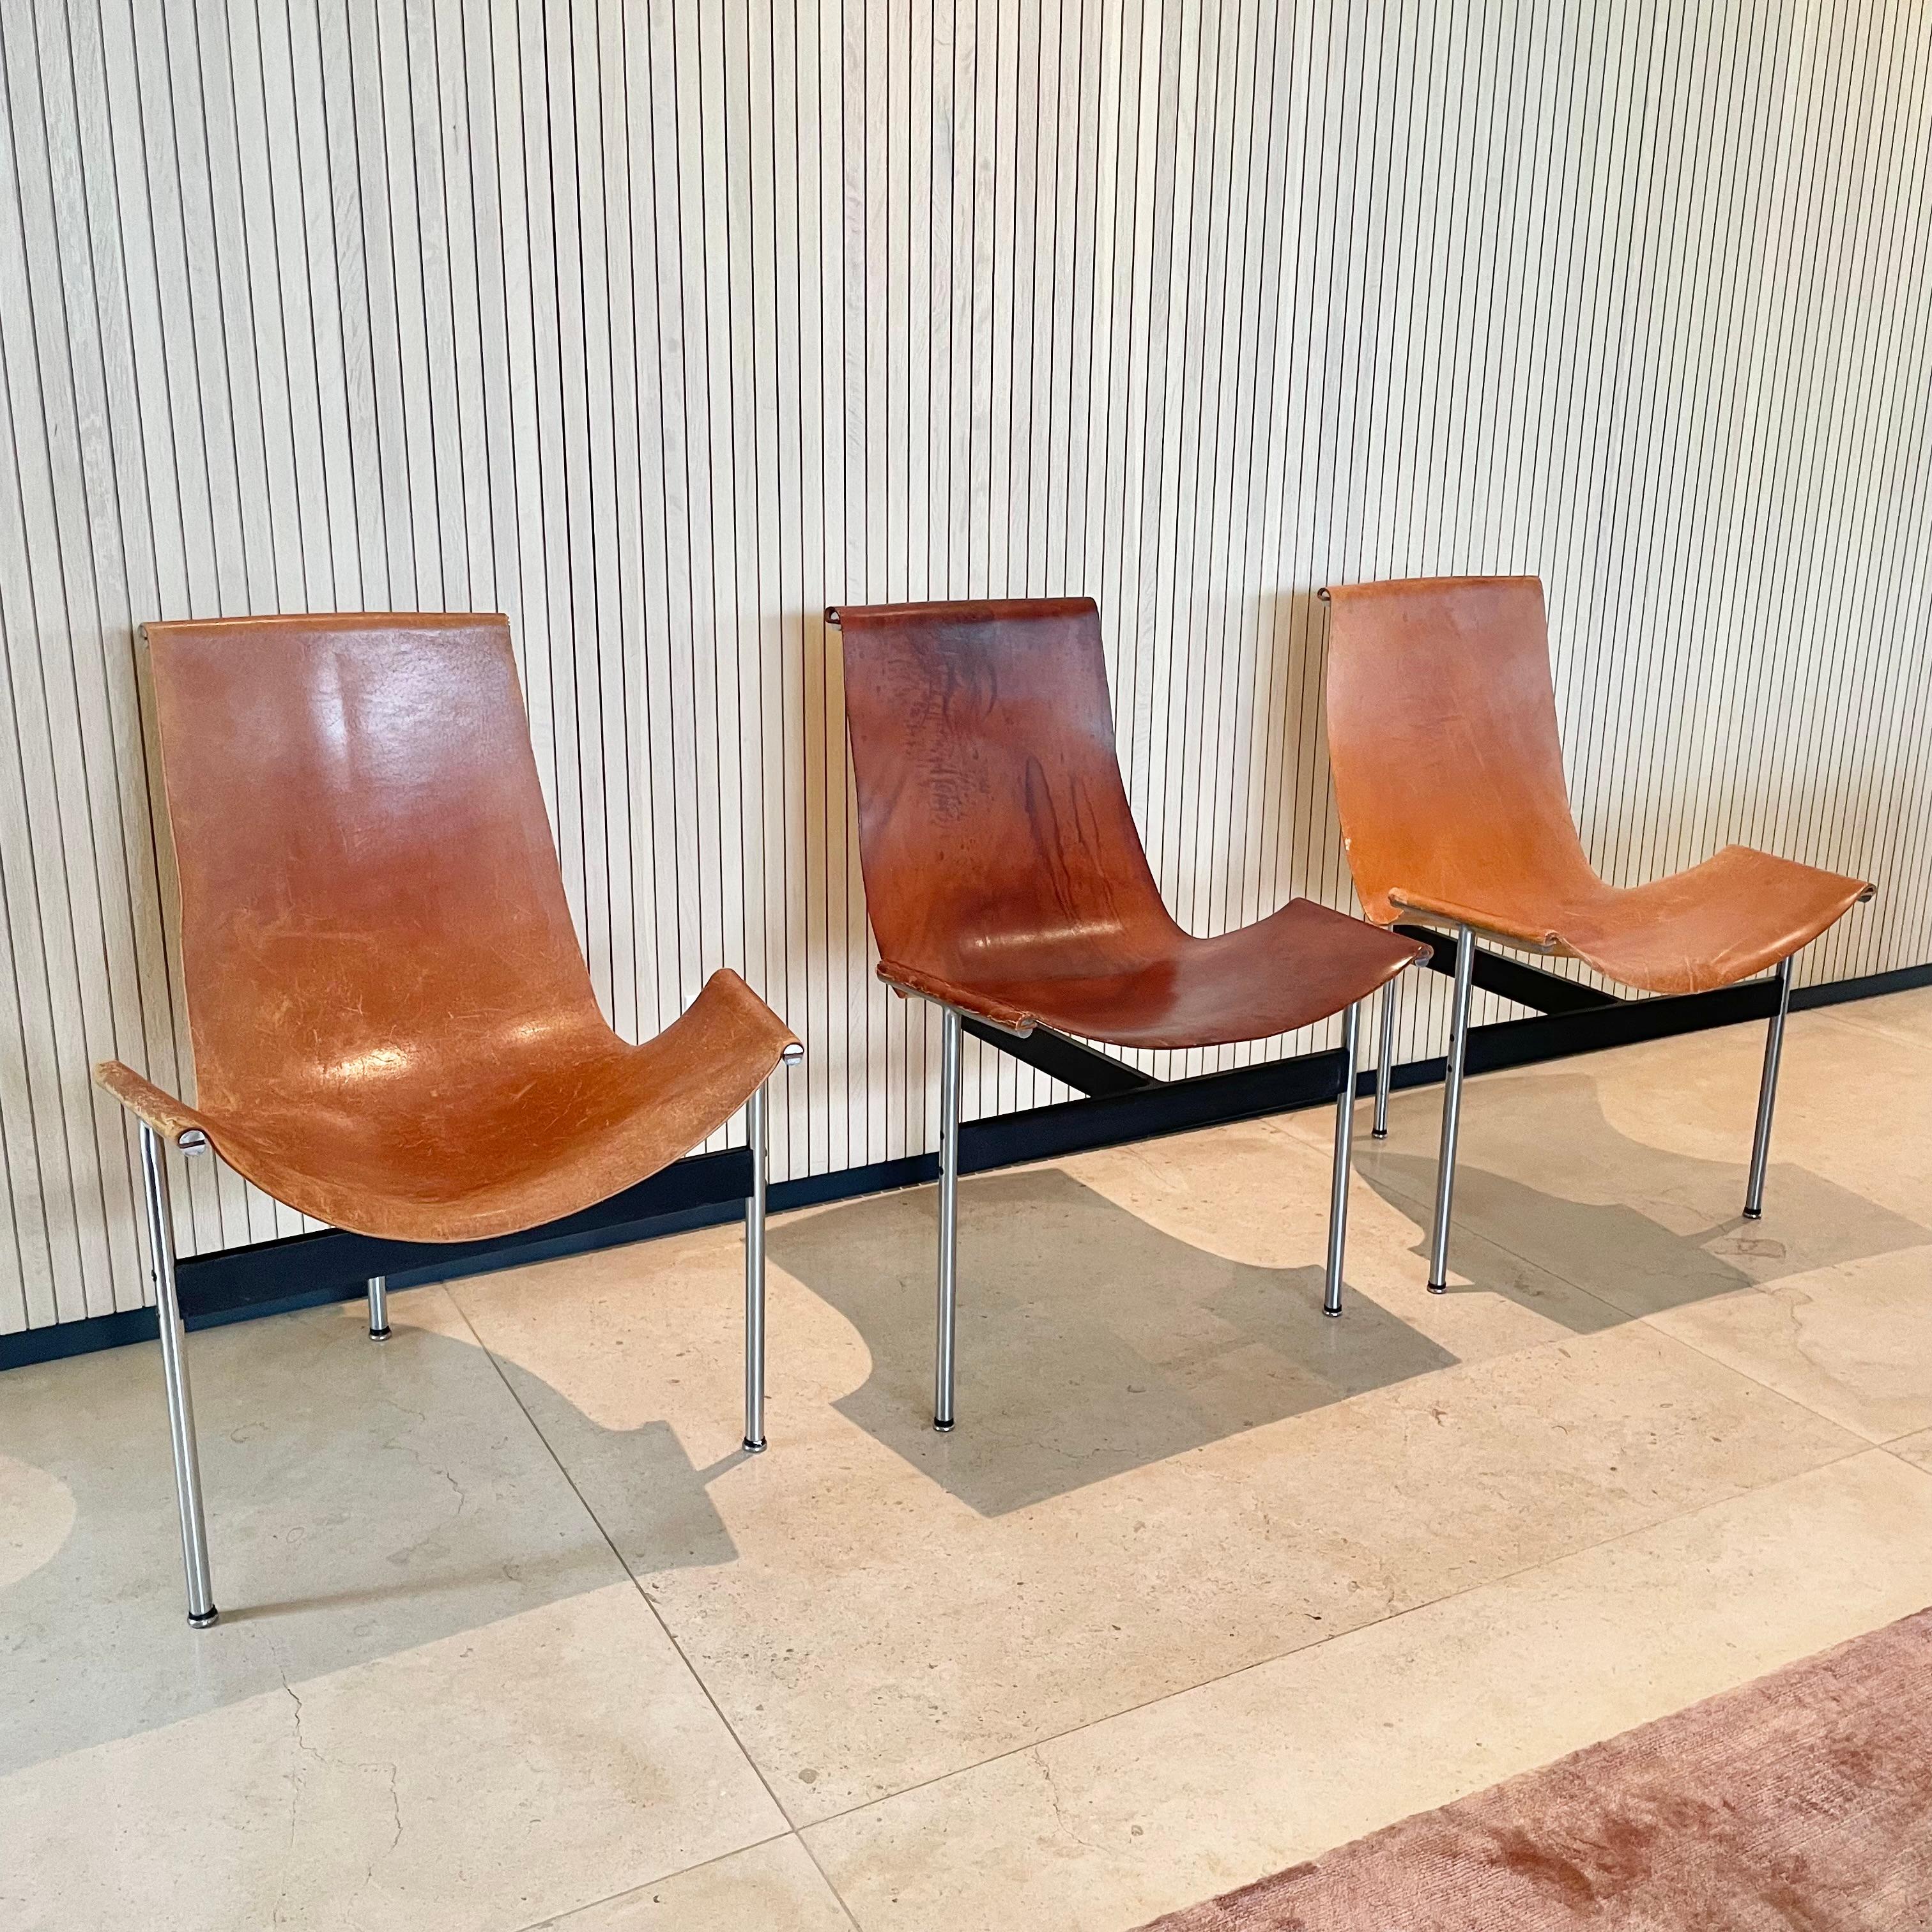 American T Chairs by Katavolos, Littell and Kelley for Laverne, 1950s USA